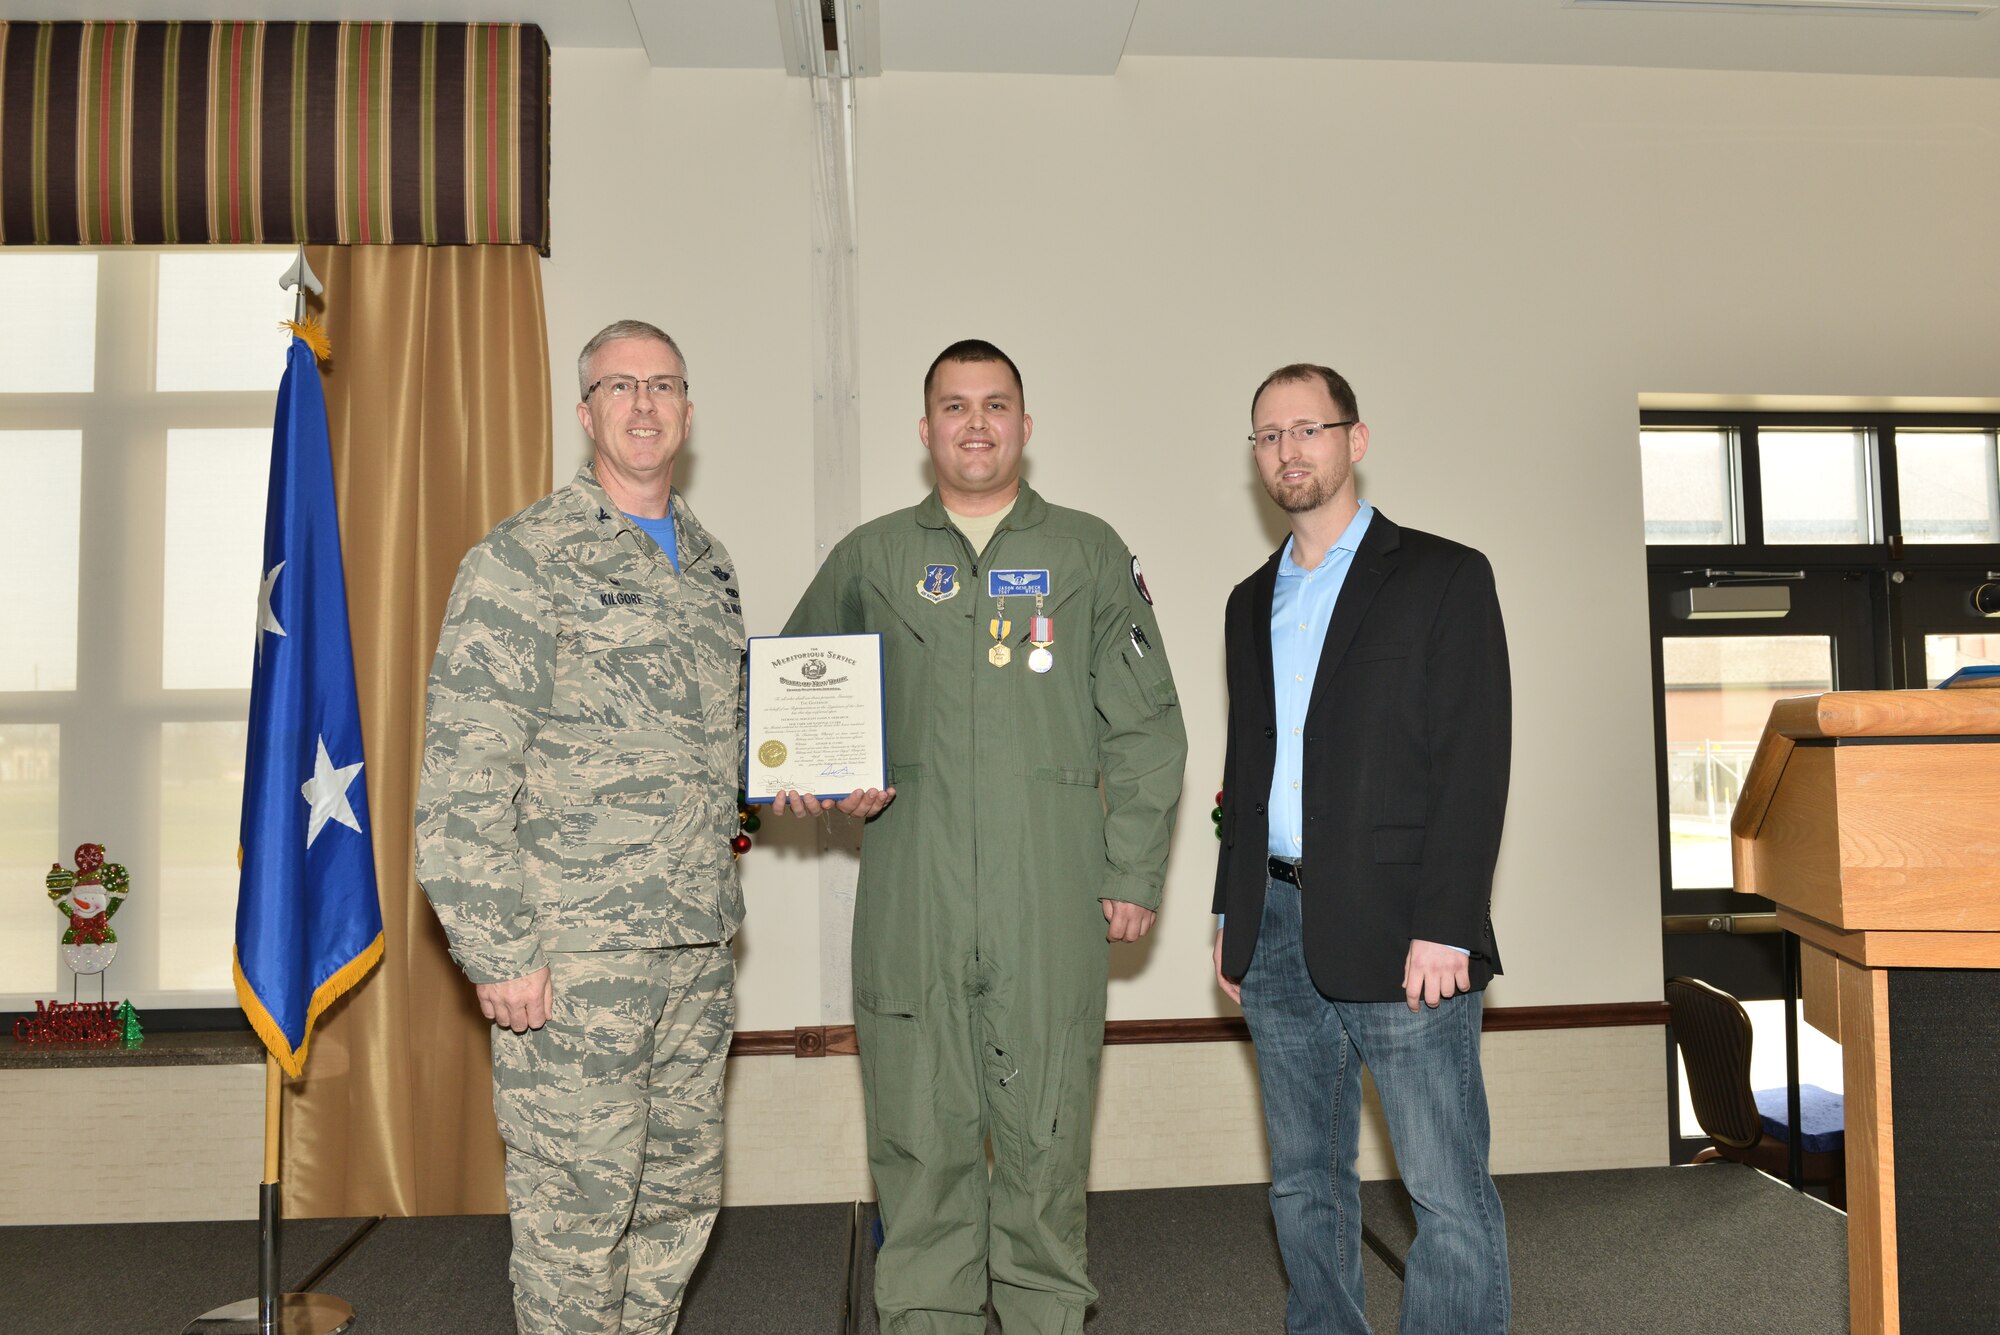 After receiving the Air Force Commendation Medal and the New York State Medal for Meritorious Service Dec. 6, 2015, Col. Robert Kilgore, Commander 107th Airlift Wing, poses with Tech. Sgt. Jason Oehlbeck who saved the life of Jack Ewald. (U.S. Air National Guard Photo/Senior Master Sgt. Ray Lloyd)